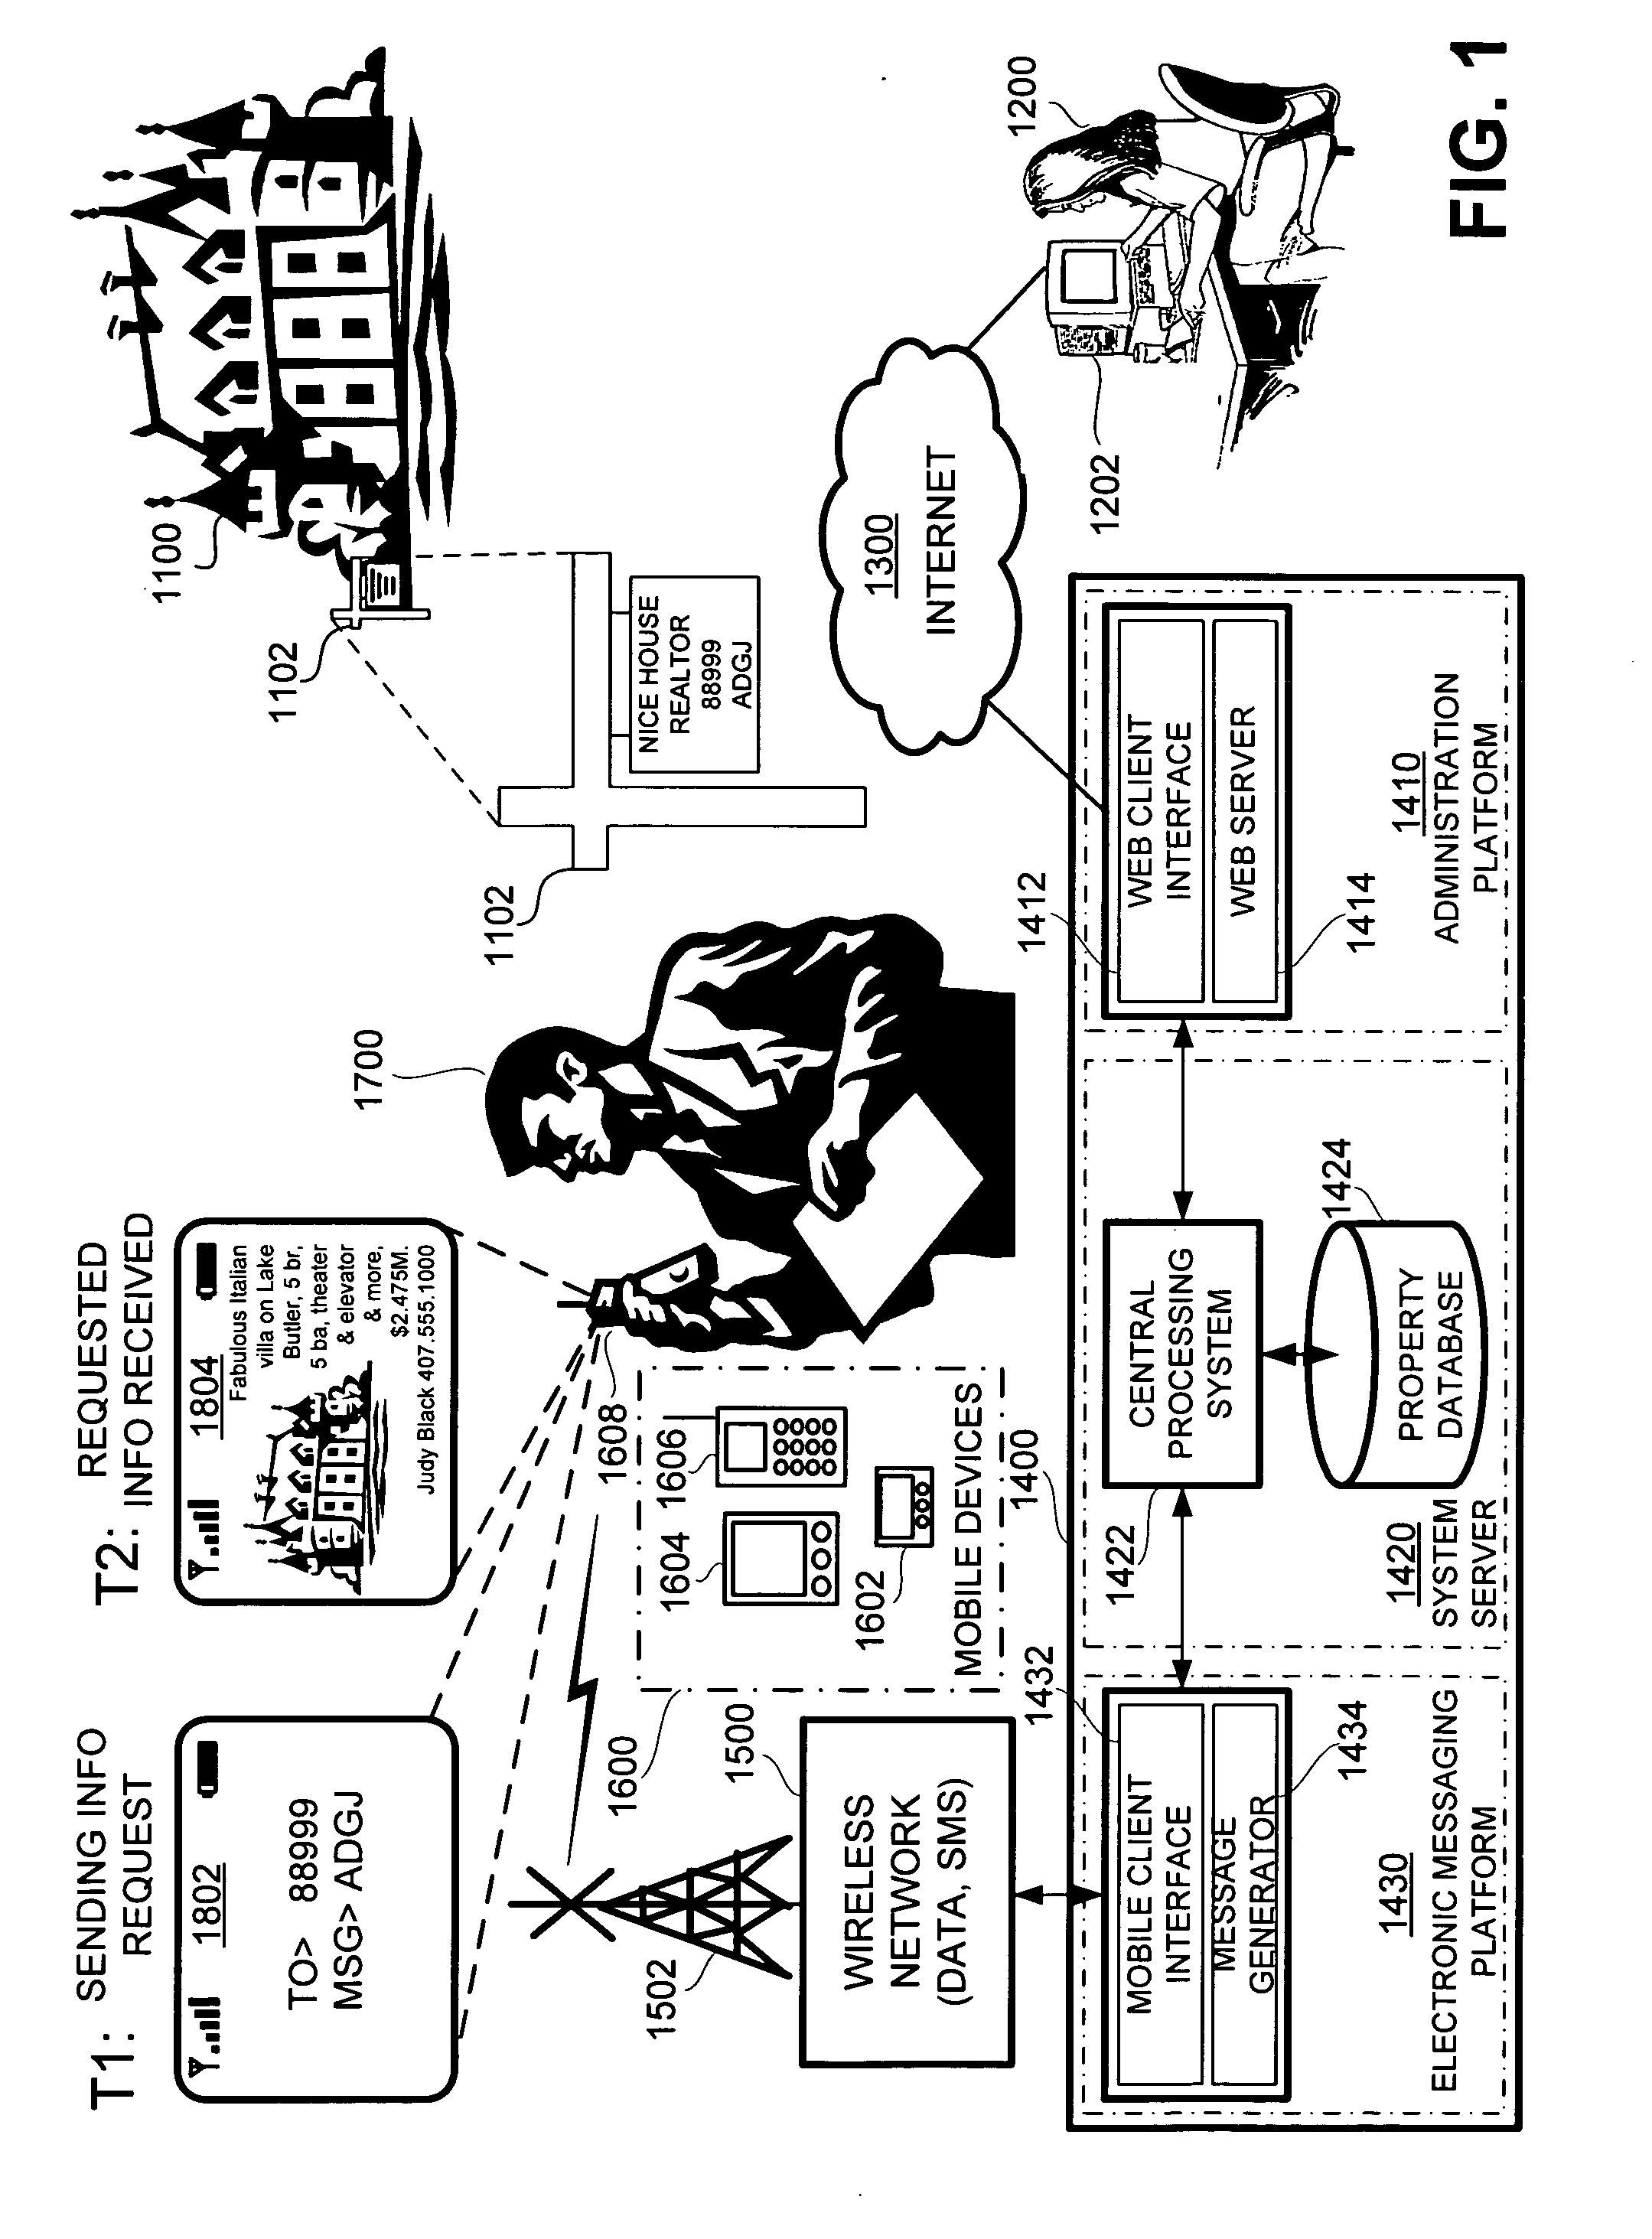 Wireless interactive property advertising system and methods